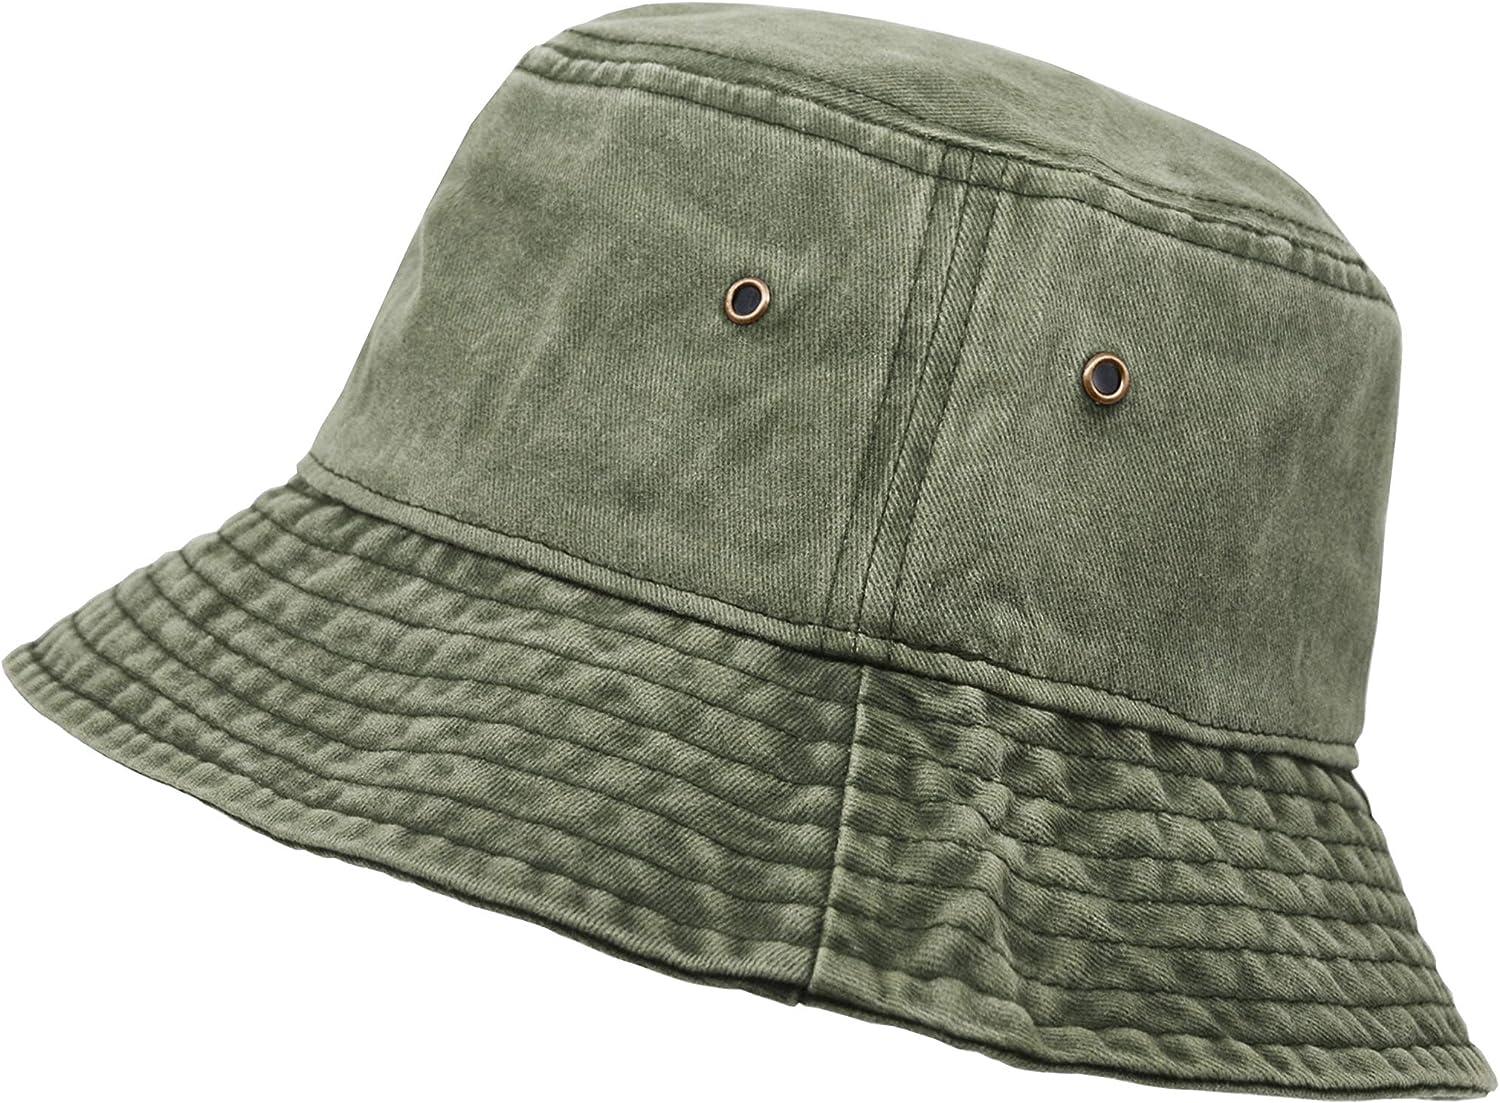 Bucket Hat, Wide Brim Washed Denim Cotton Outdoor Sun Hat Flat Top Cap for  Fishing Hiking Beach Sports Army Green